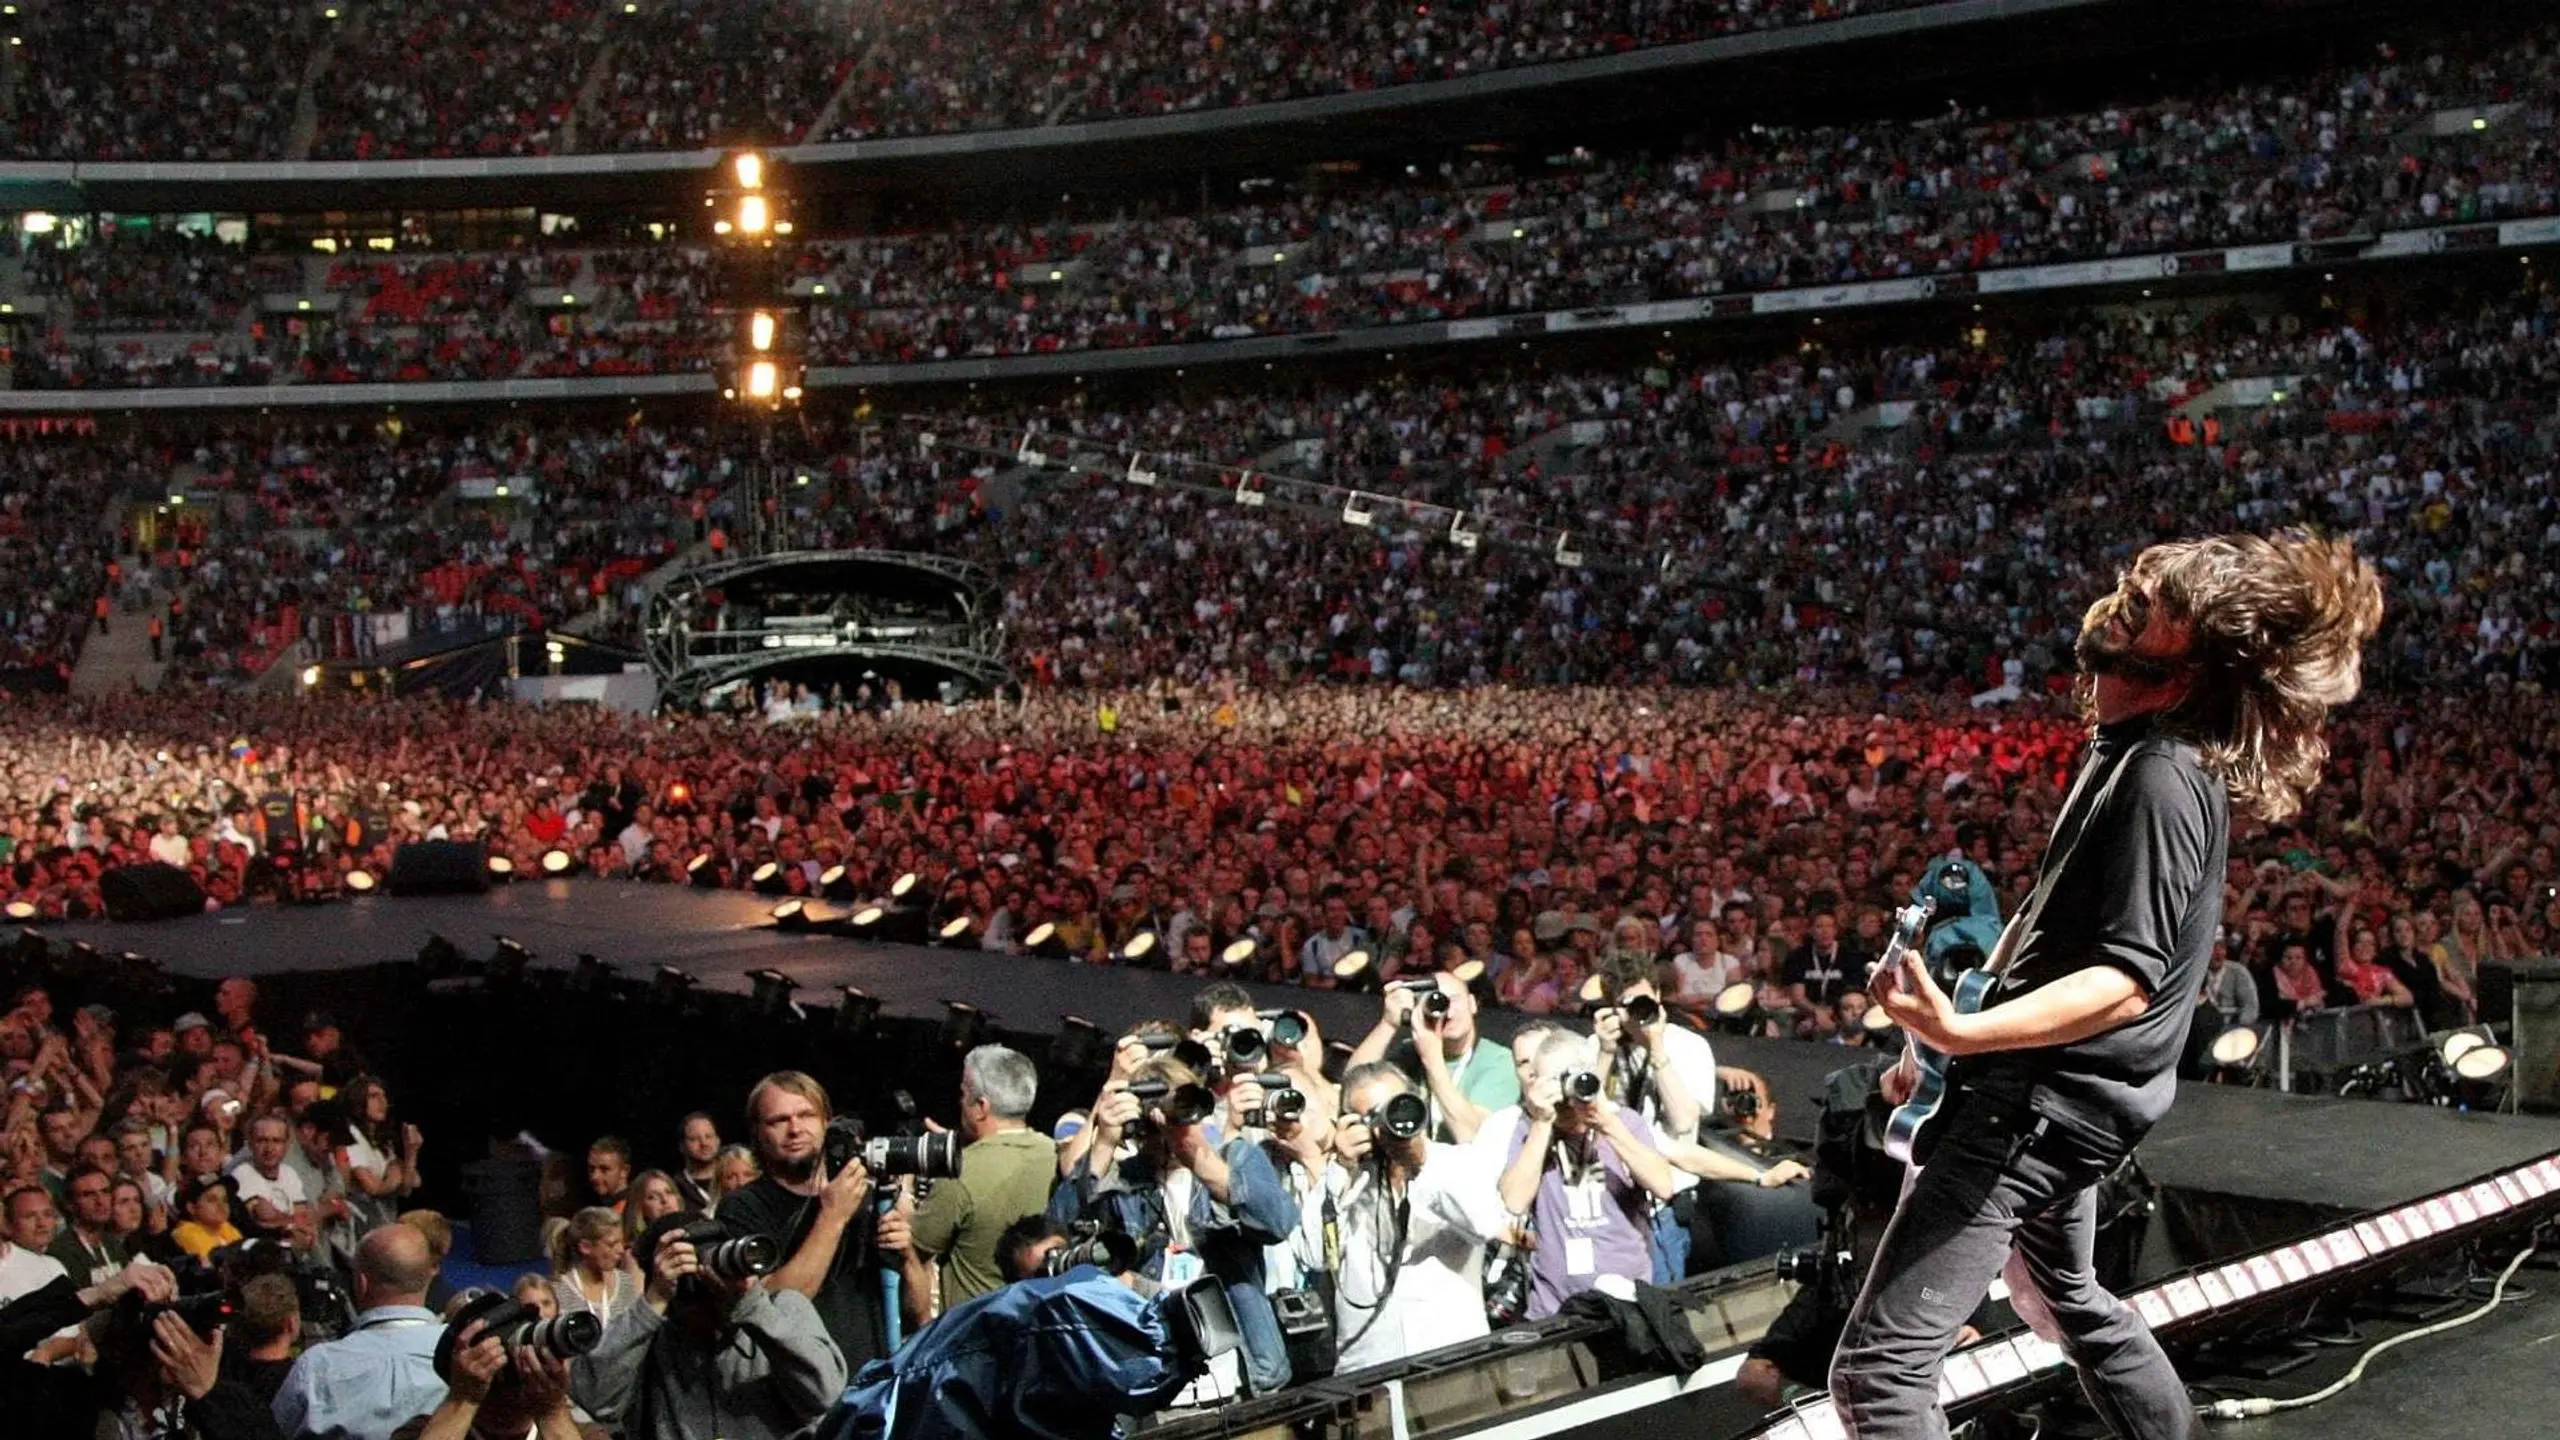 Foo Fighters: Live at Wembley Stadium